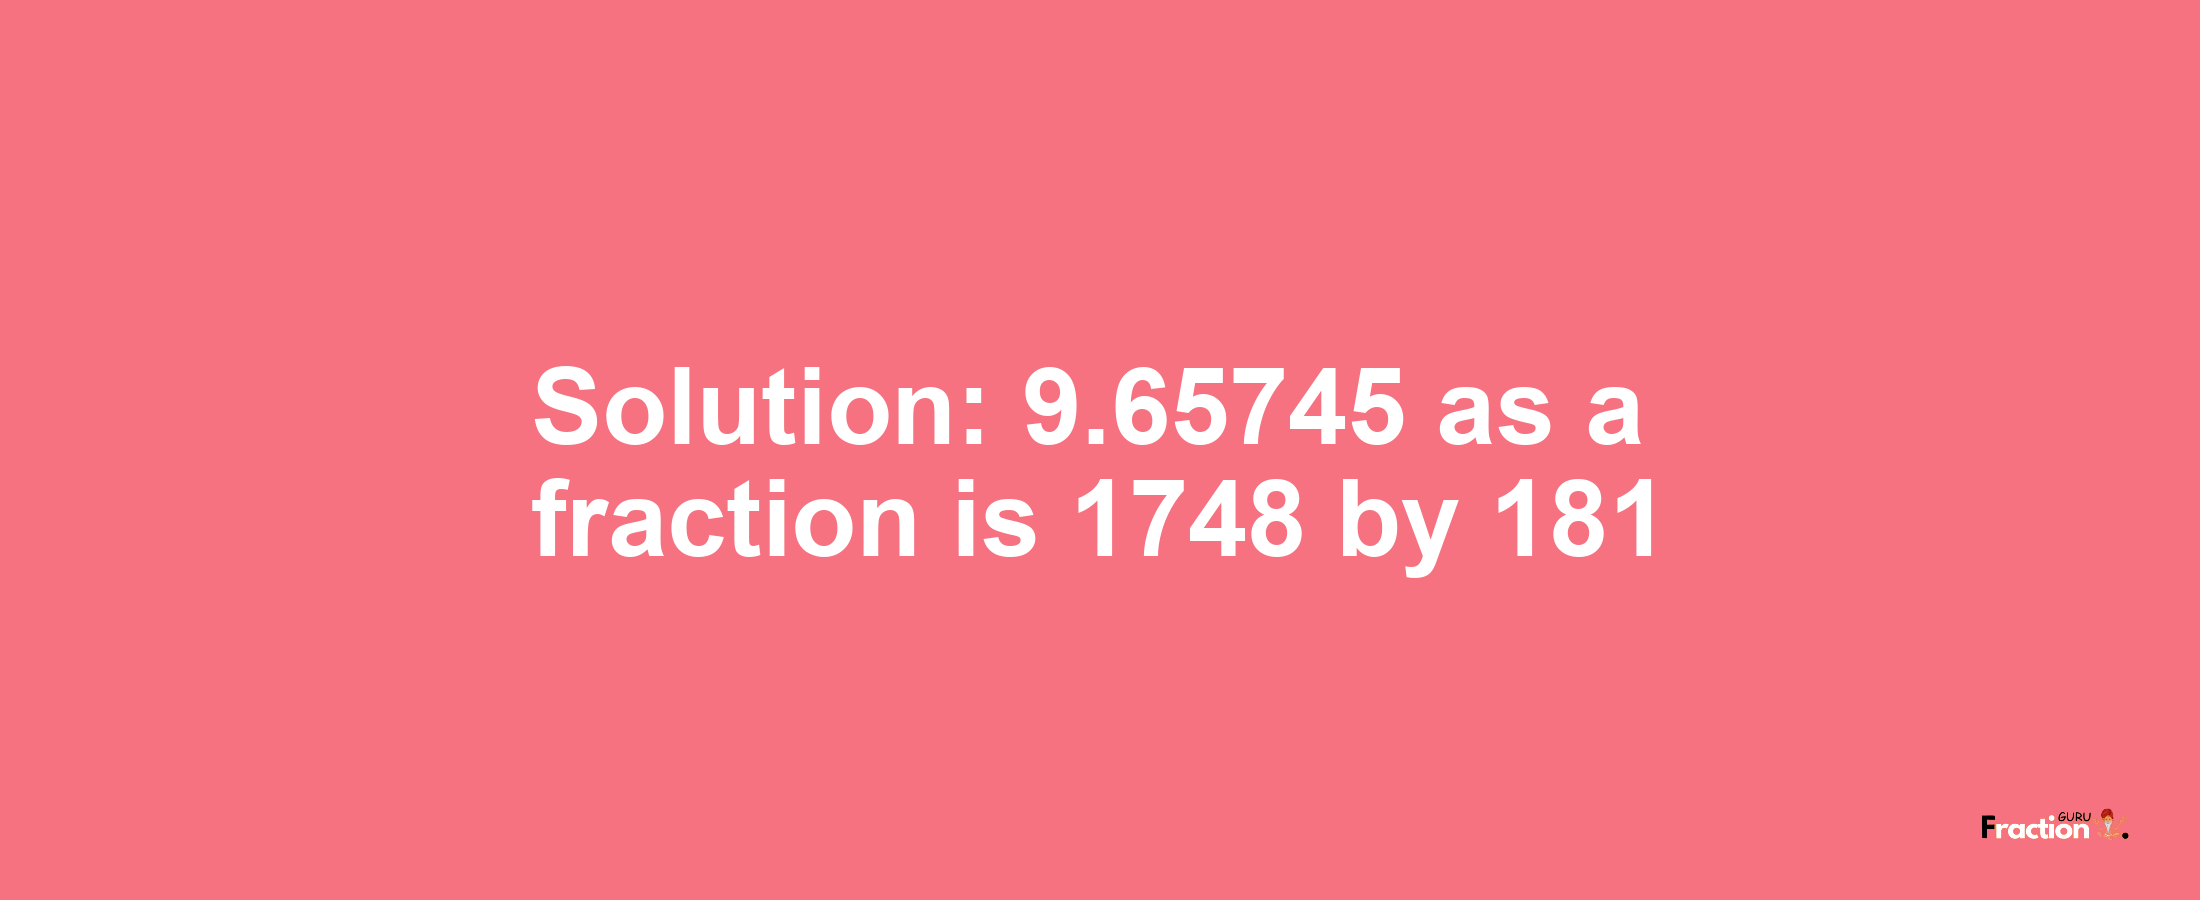 Solution:9.65745 as a fraction is 1748/181